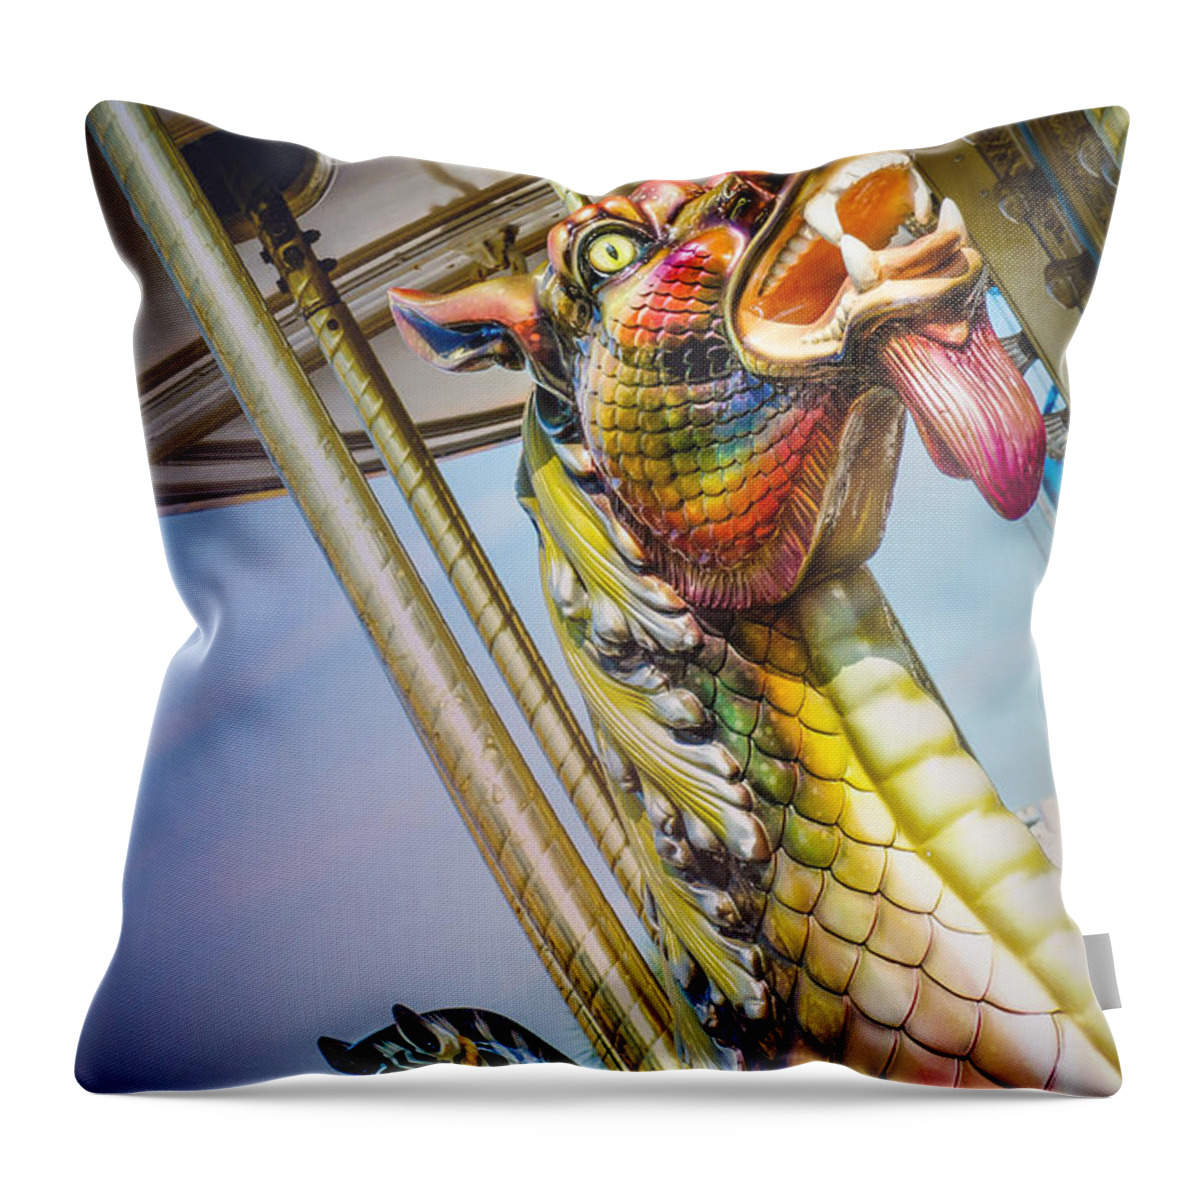 Merry Go Round Throw Pillow featuring the photograph Merry Dragon by TK Goforth